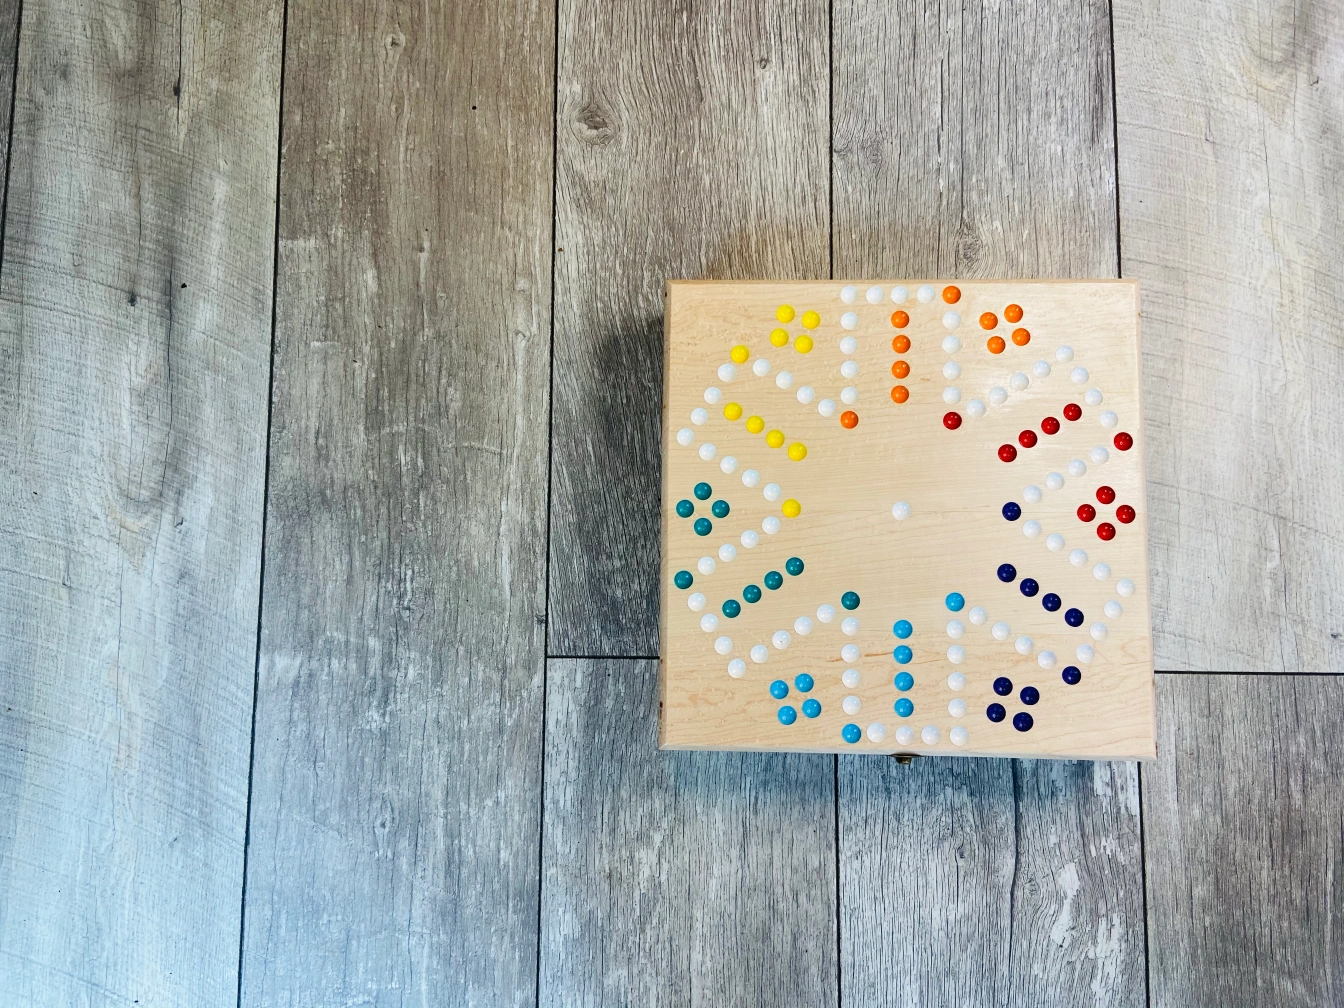 How to Make an Aggravation Board Game with Marble Storage The Walnut